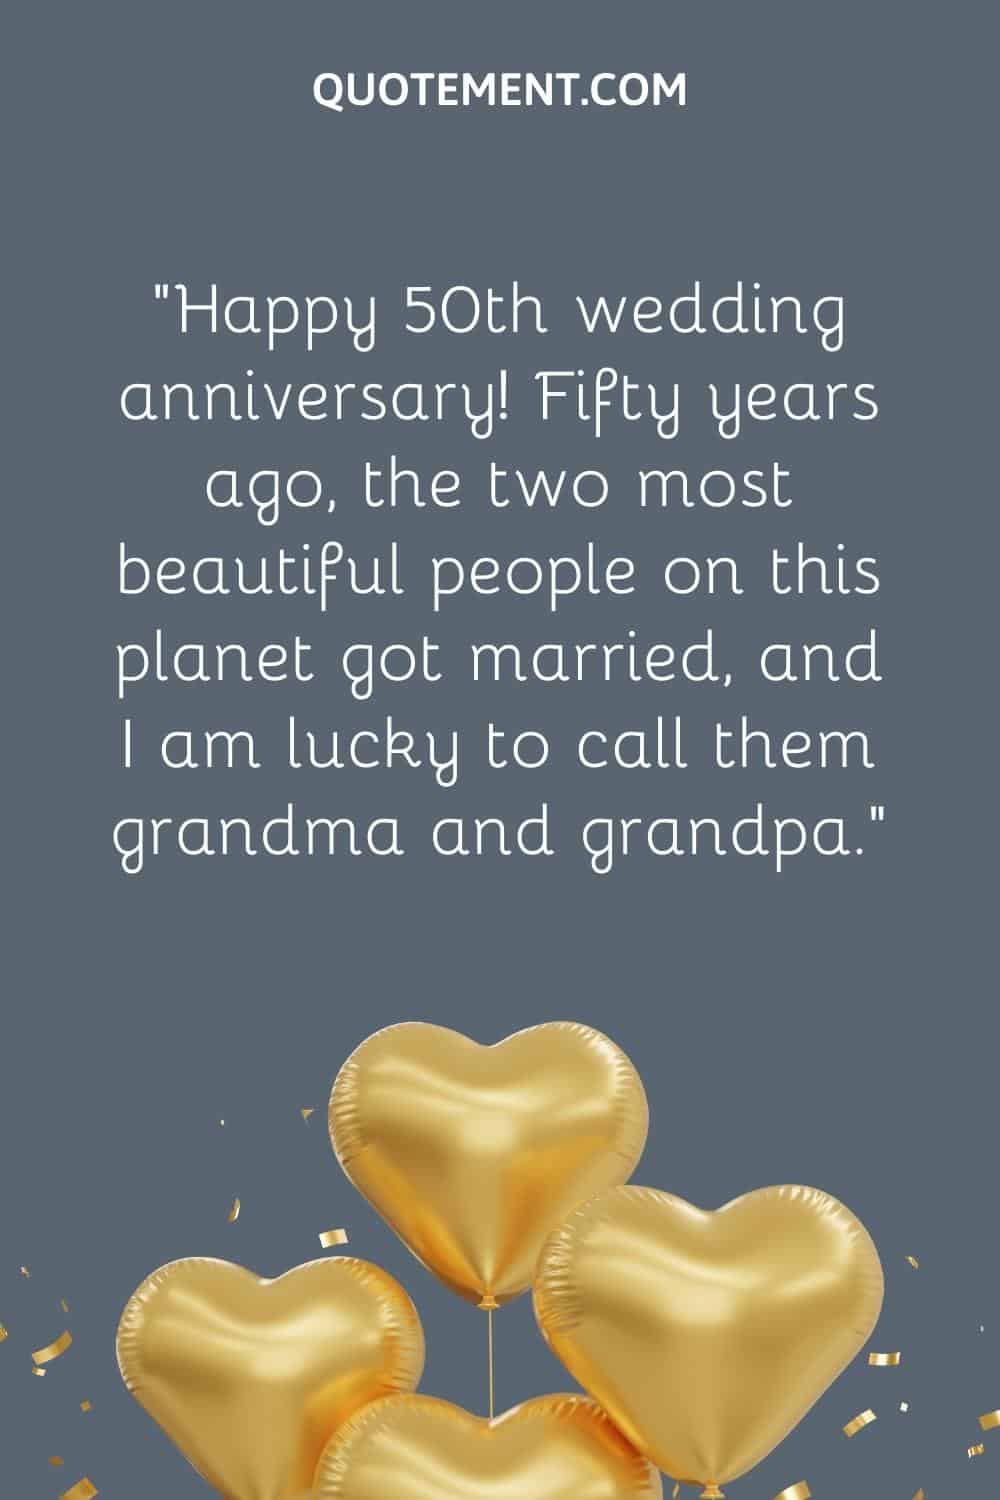 Golden heart-shaped balloons for your grandparents' happy 50th anniversary.